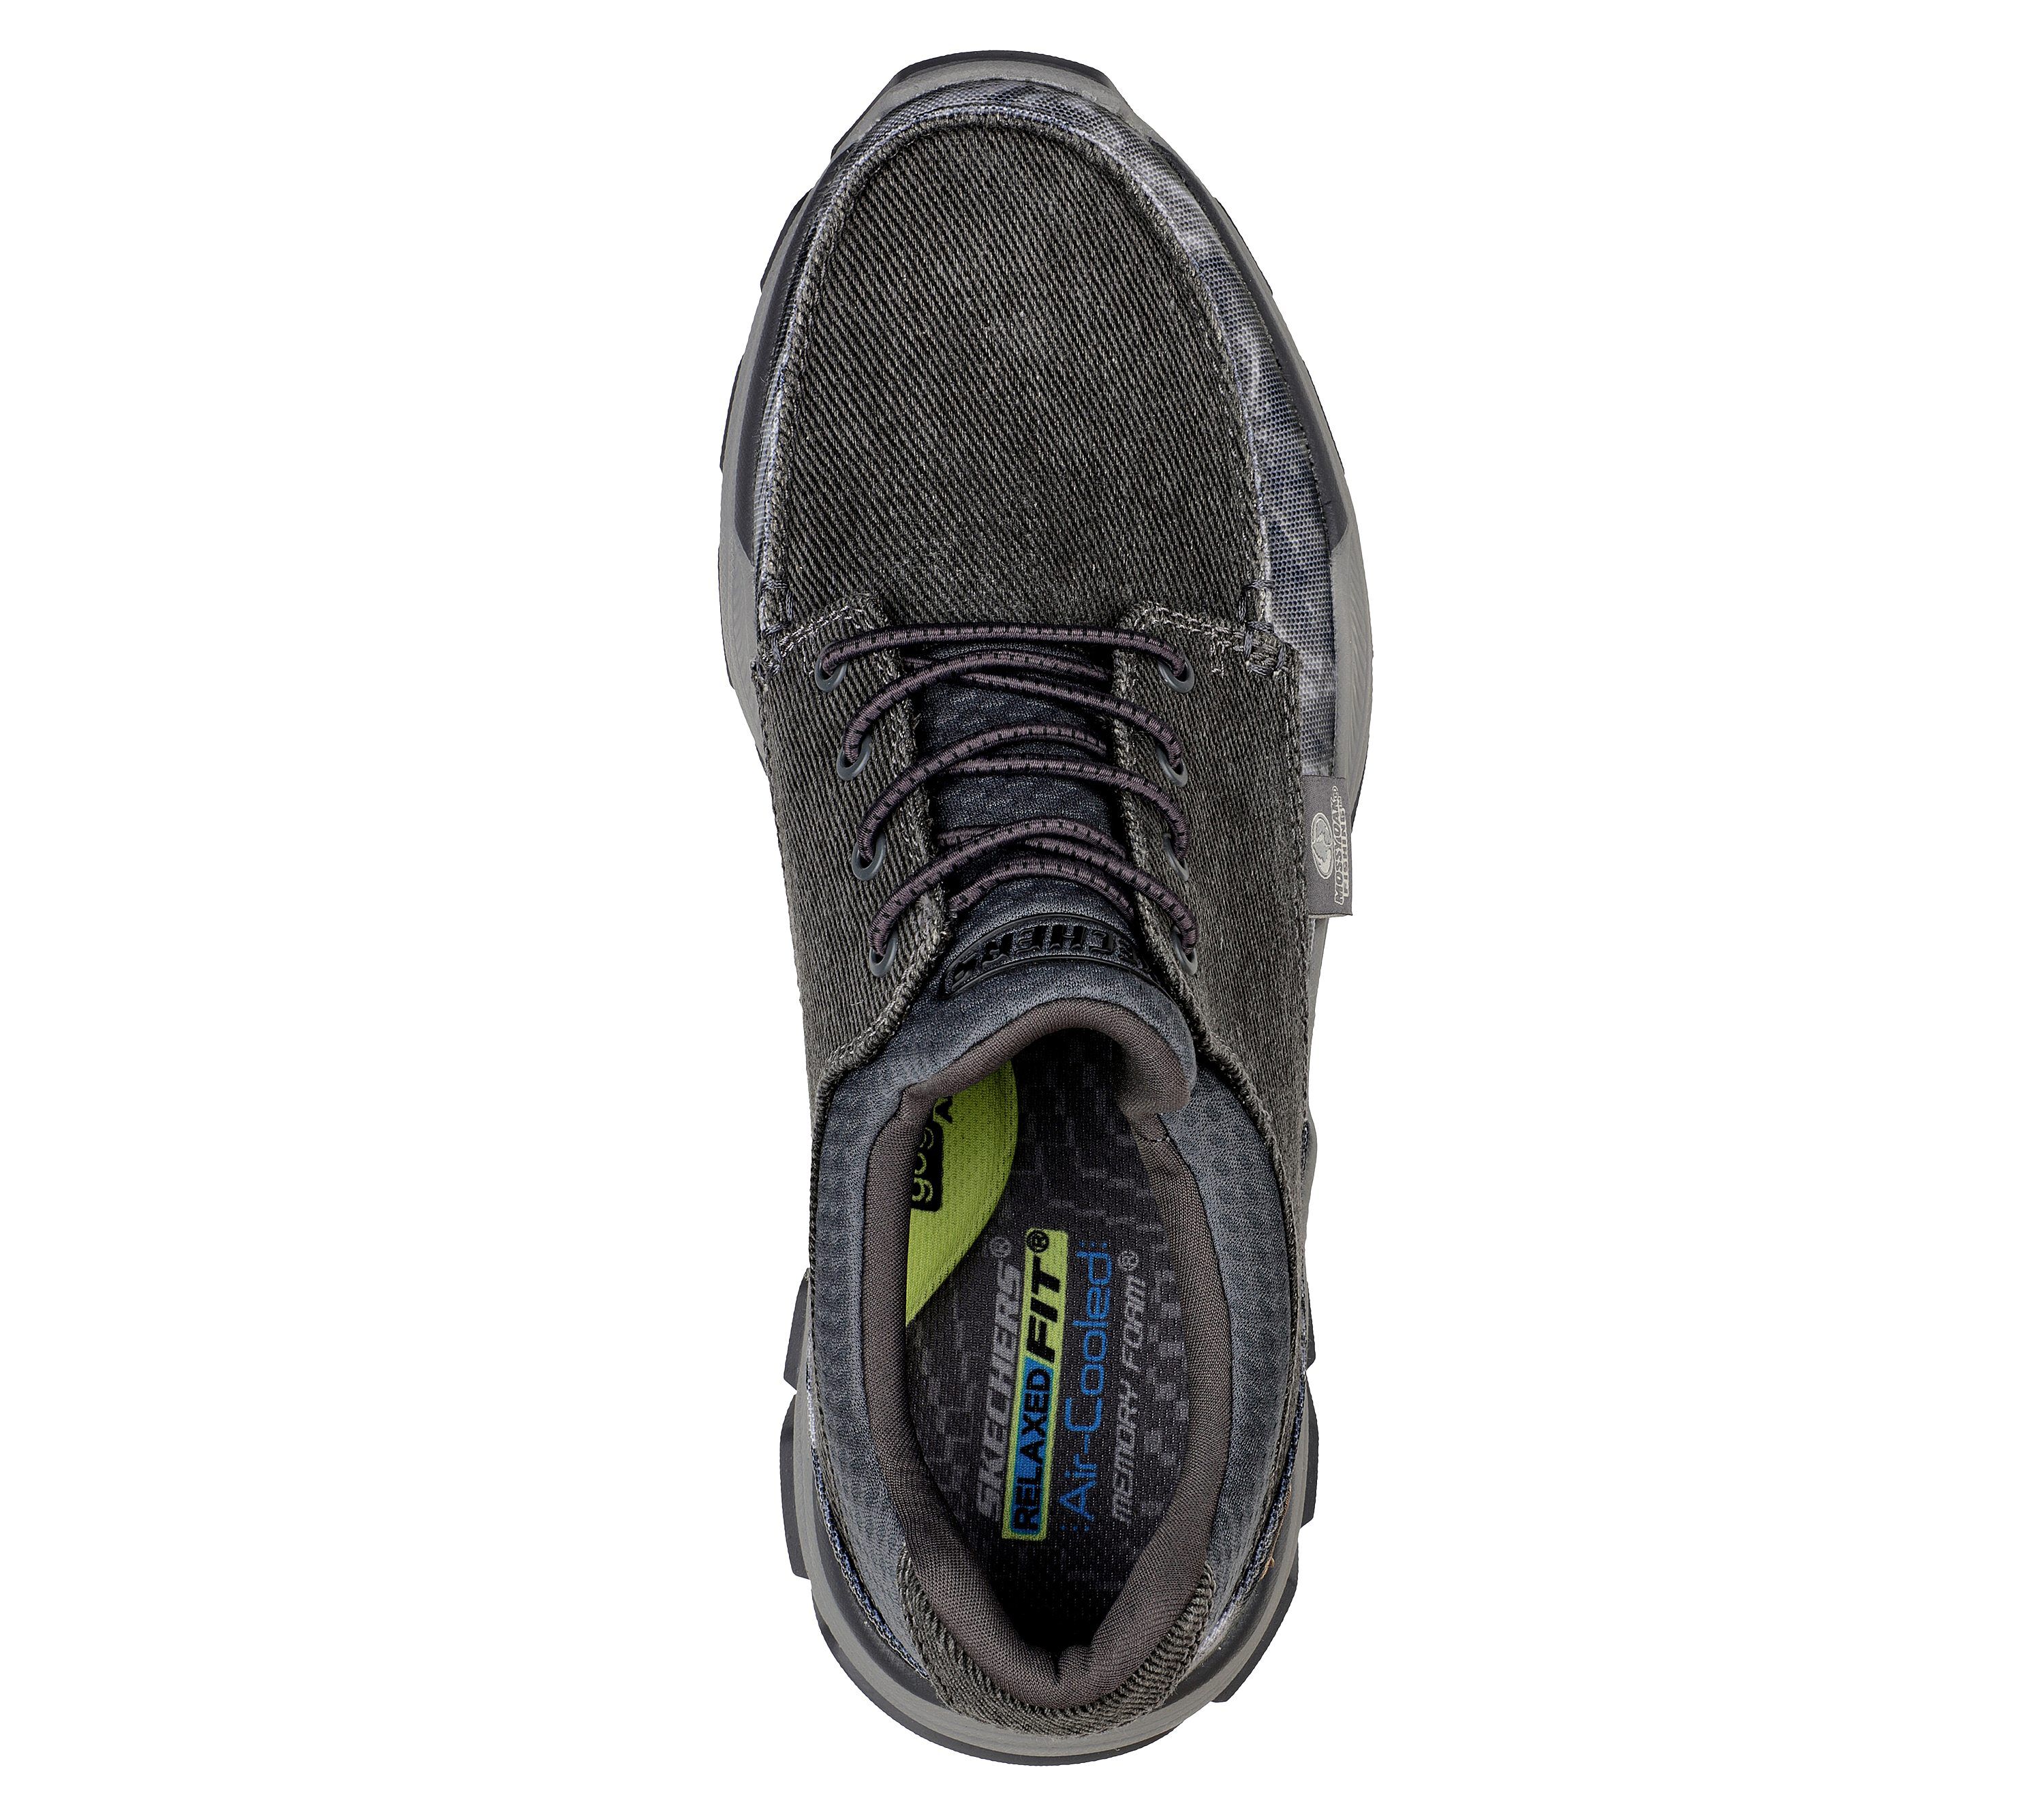 Shop the Relaxed Fit: Respected - Loleto | SKECHERS